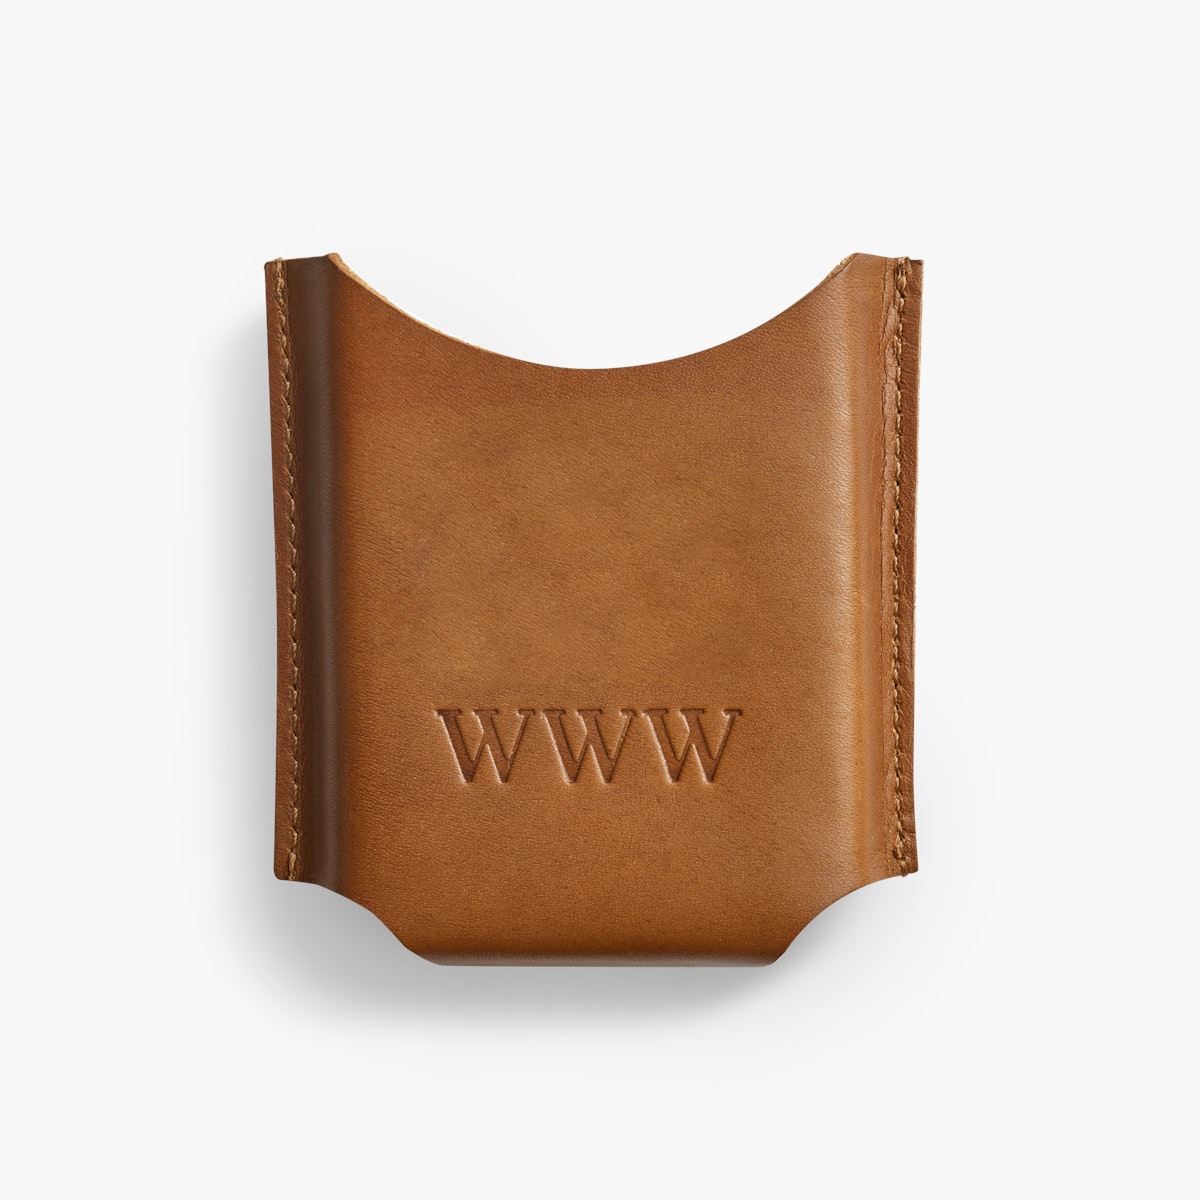 Padlock On Strap Monogram - Wallets and Small Leather Goods